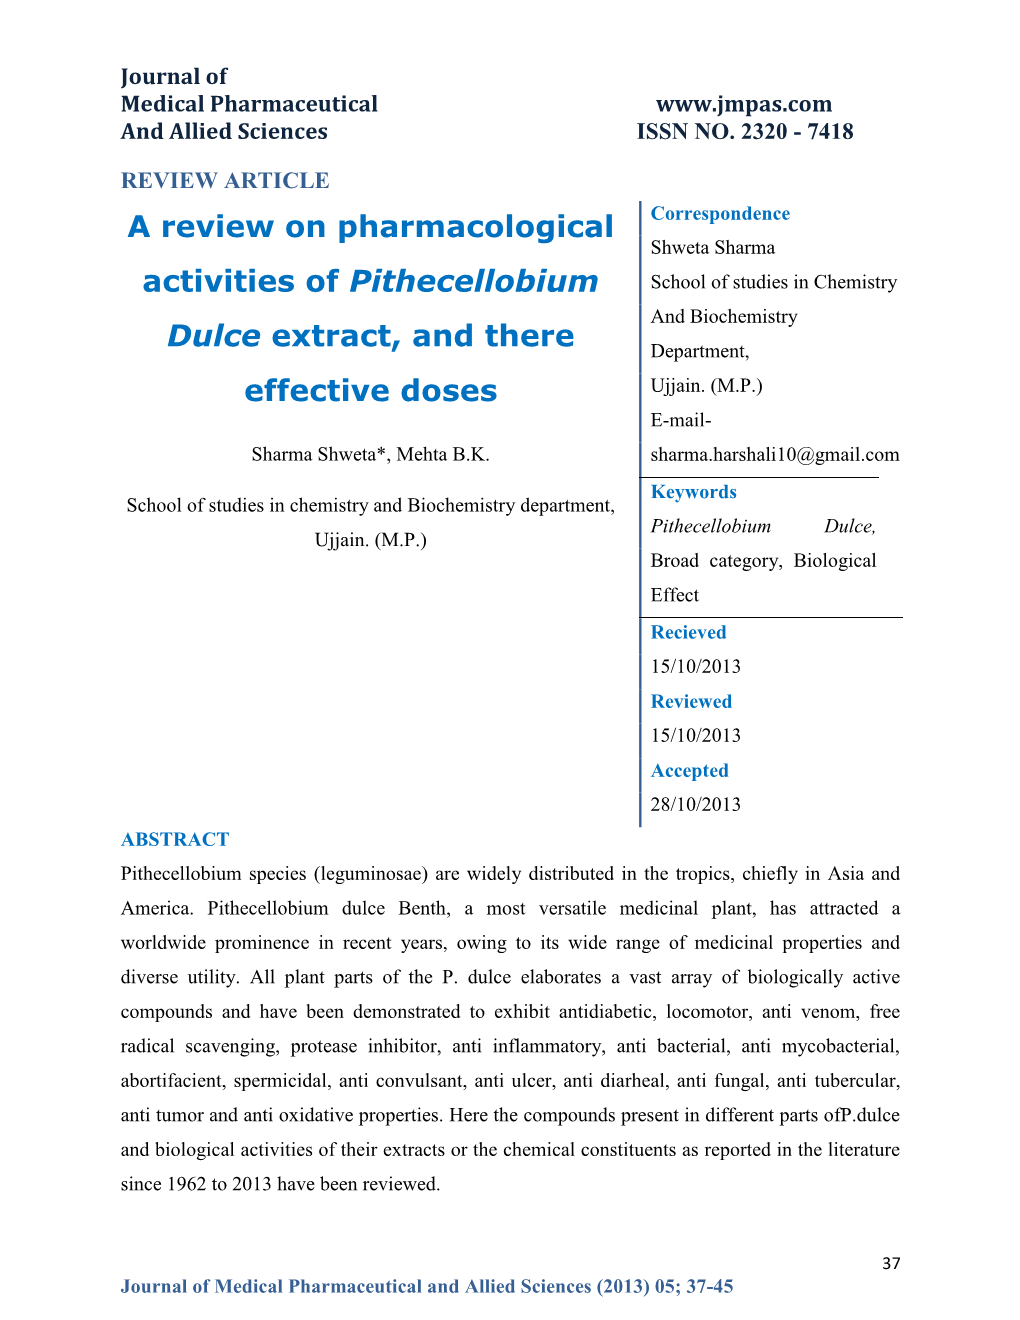 A Review on Pharmacological Activities of Pithecellobium Dulce Extract, and There Effective Doses